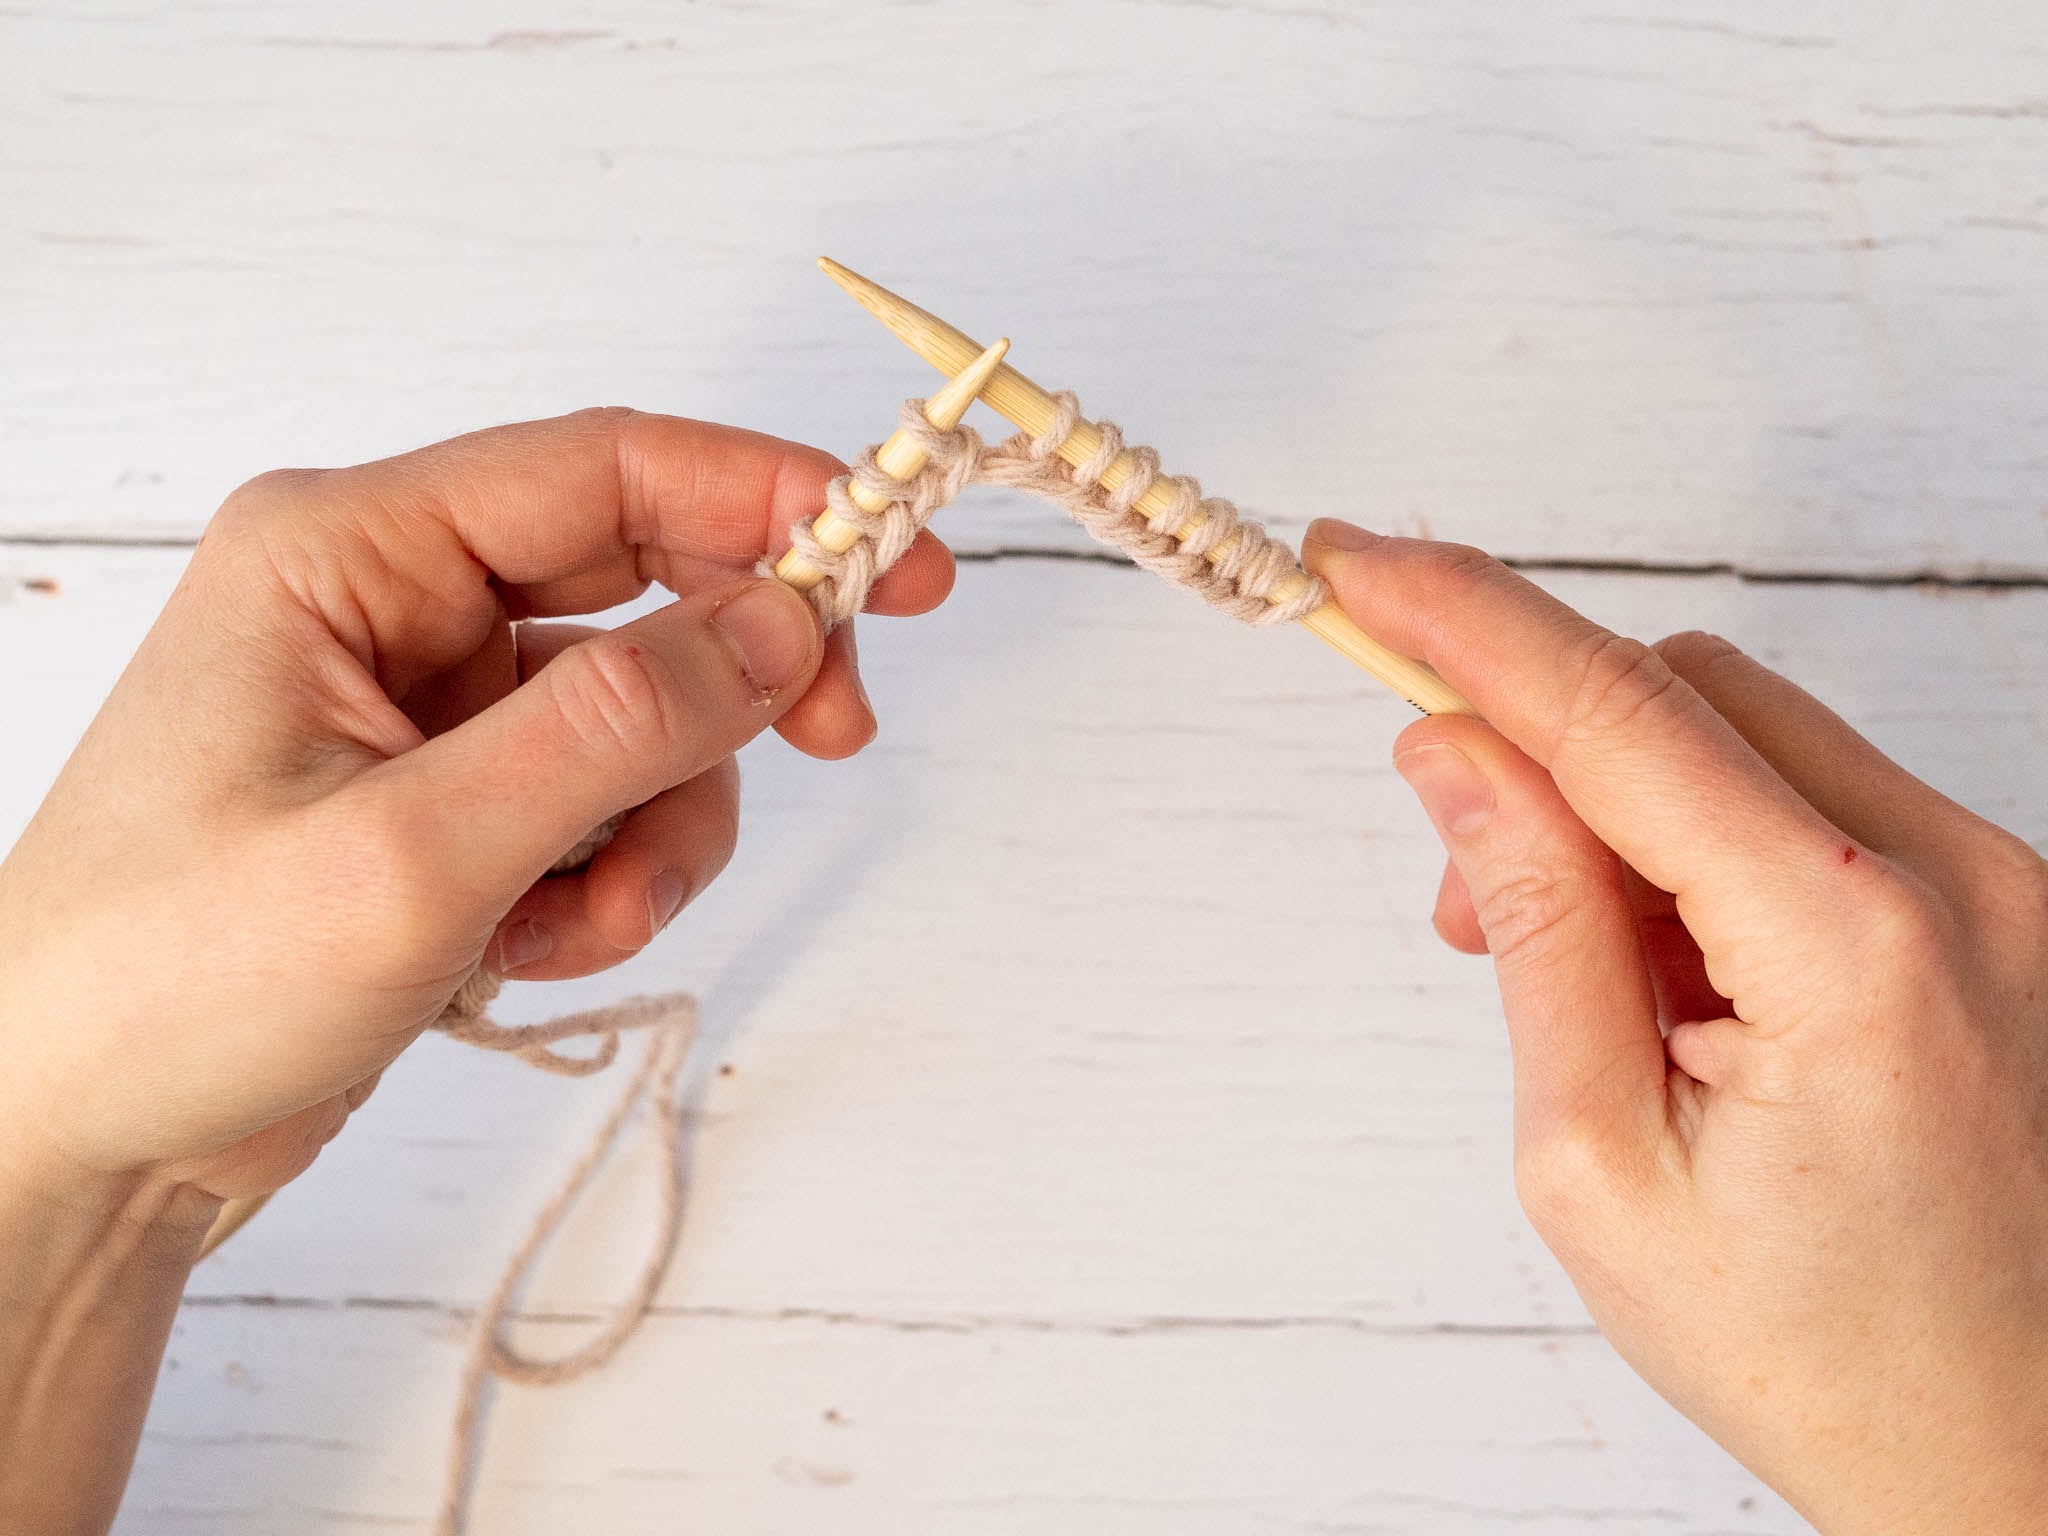 How to Choose Between DPNs and Circular Knitting Needles • The Knitting  Needle Guide